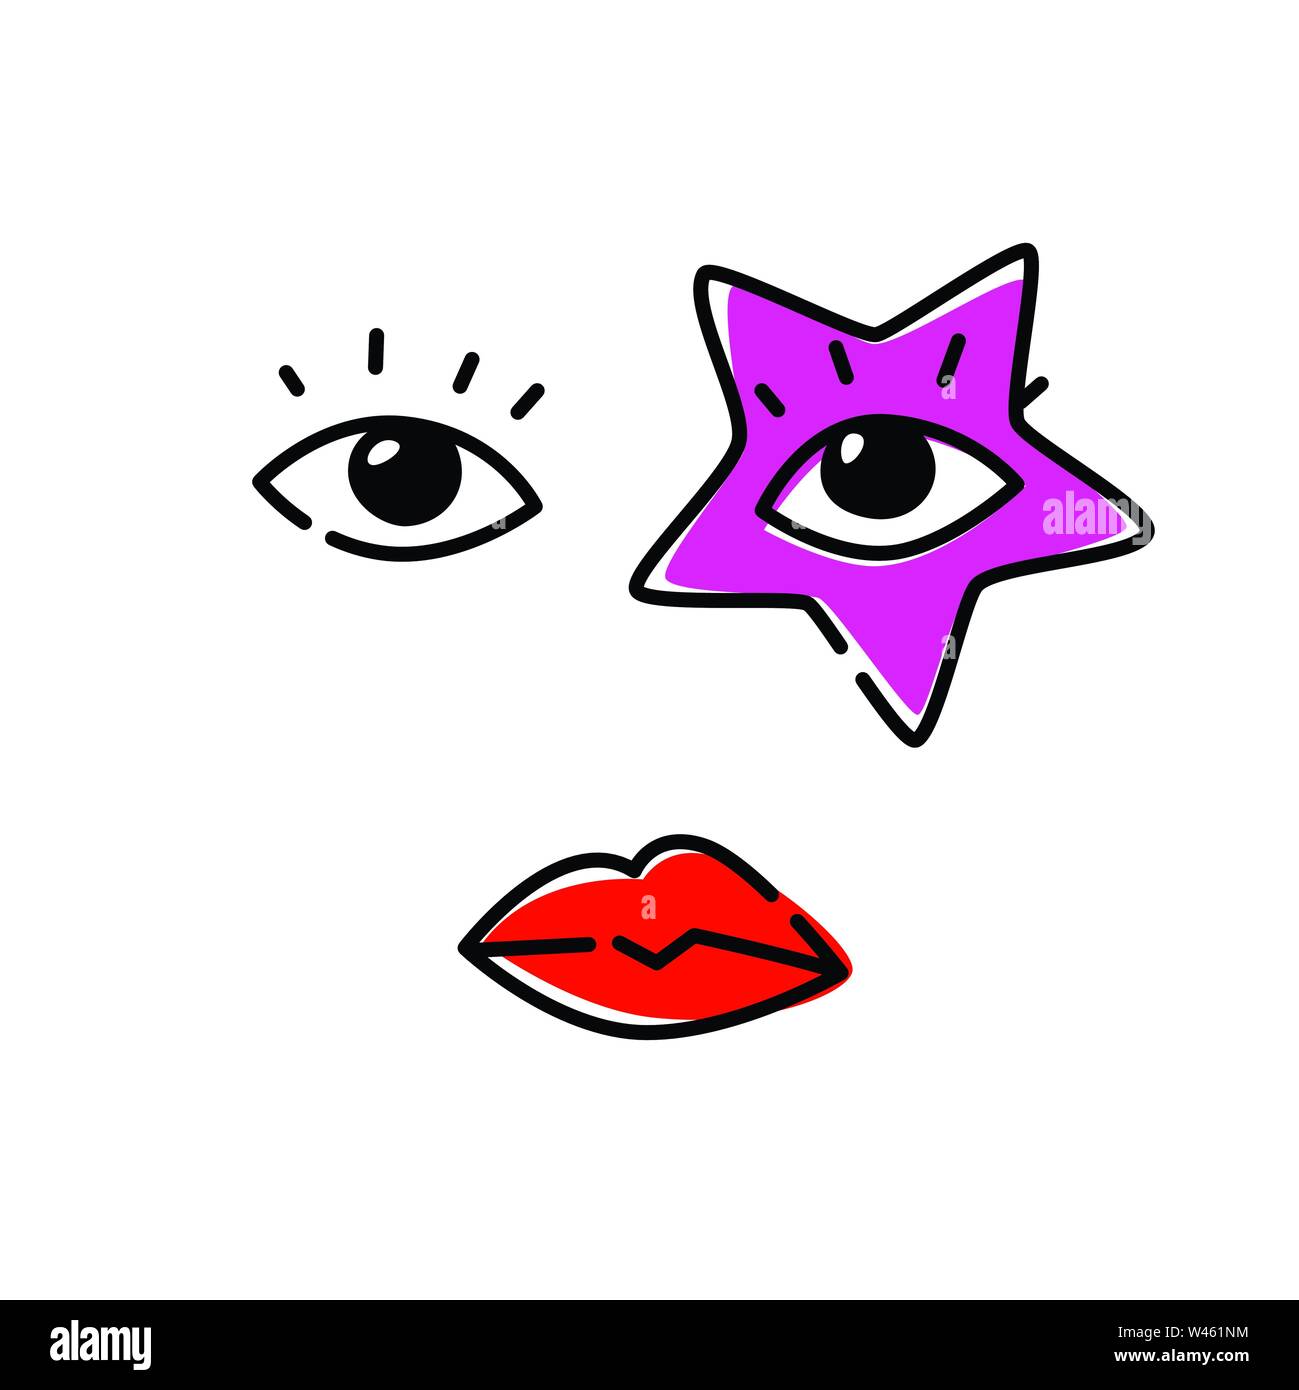 Illustration of human eyes. Vector. The look is directed to the viewer. An image of a pop star. Red star as a make-up on the face. Fashionable image f Stock Vector